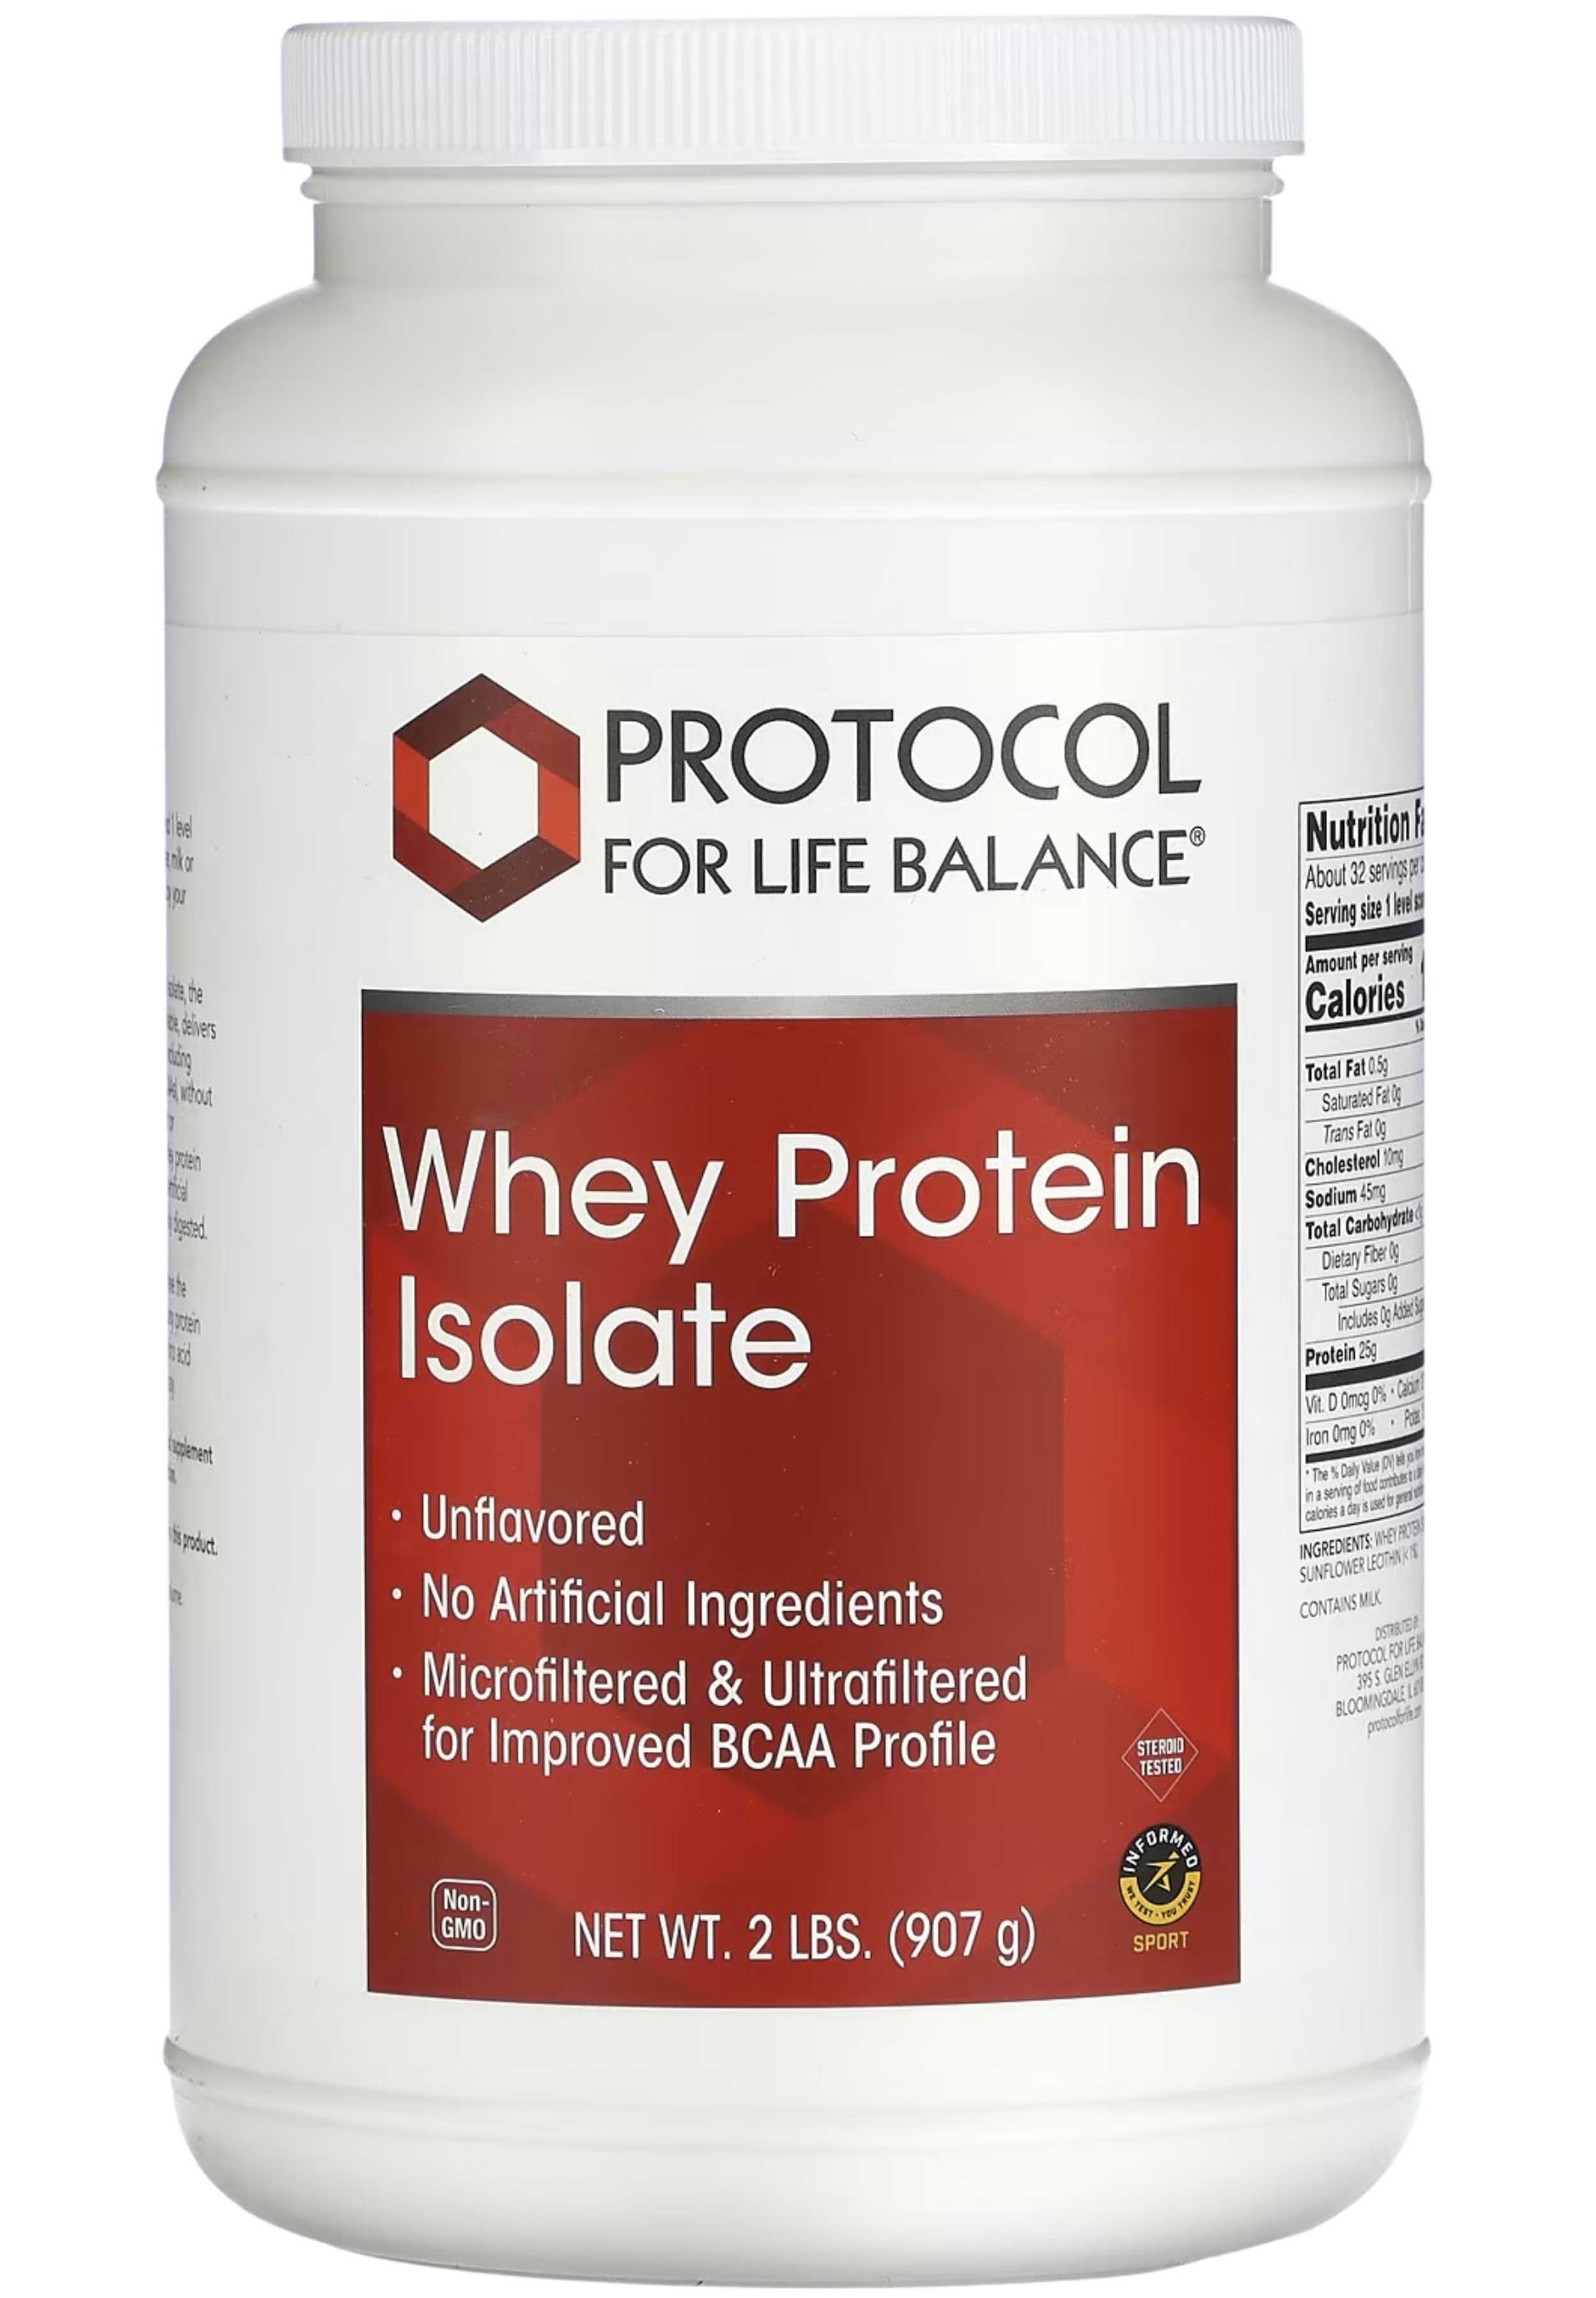 Protocol for Life Balance Whey Protein Isolate